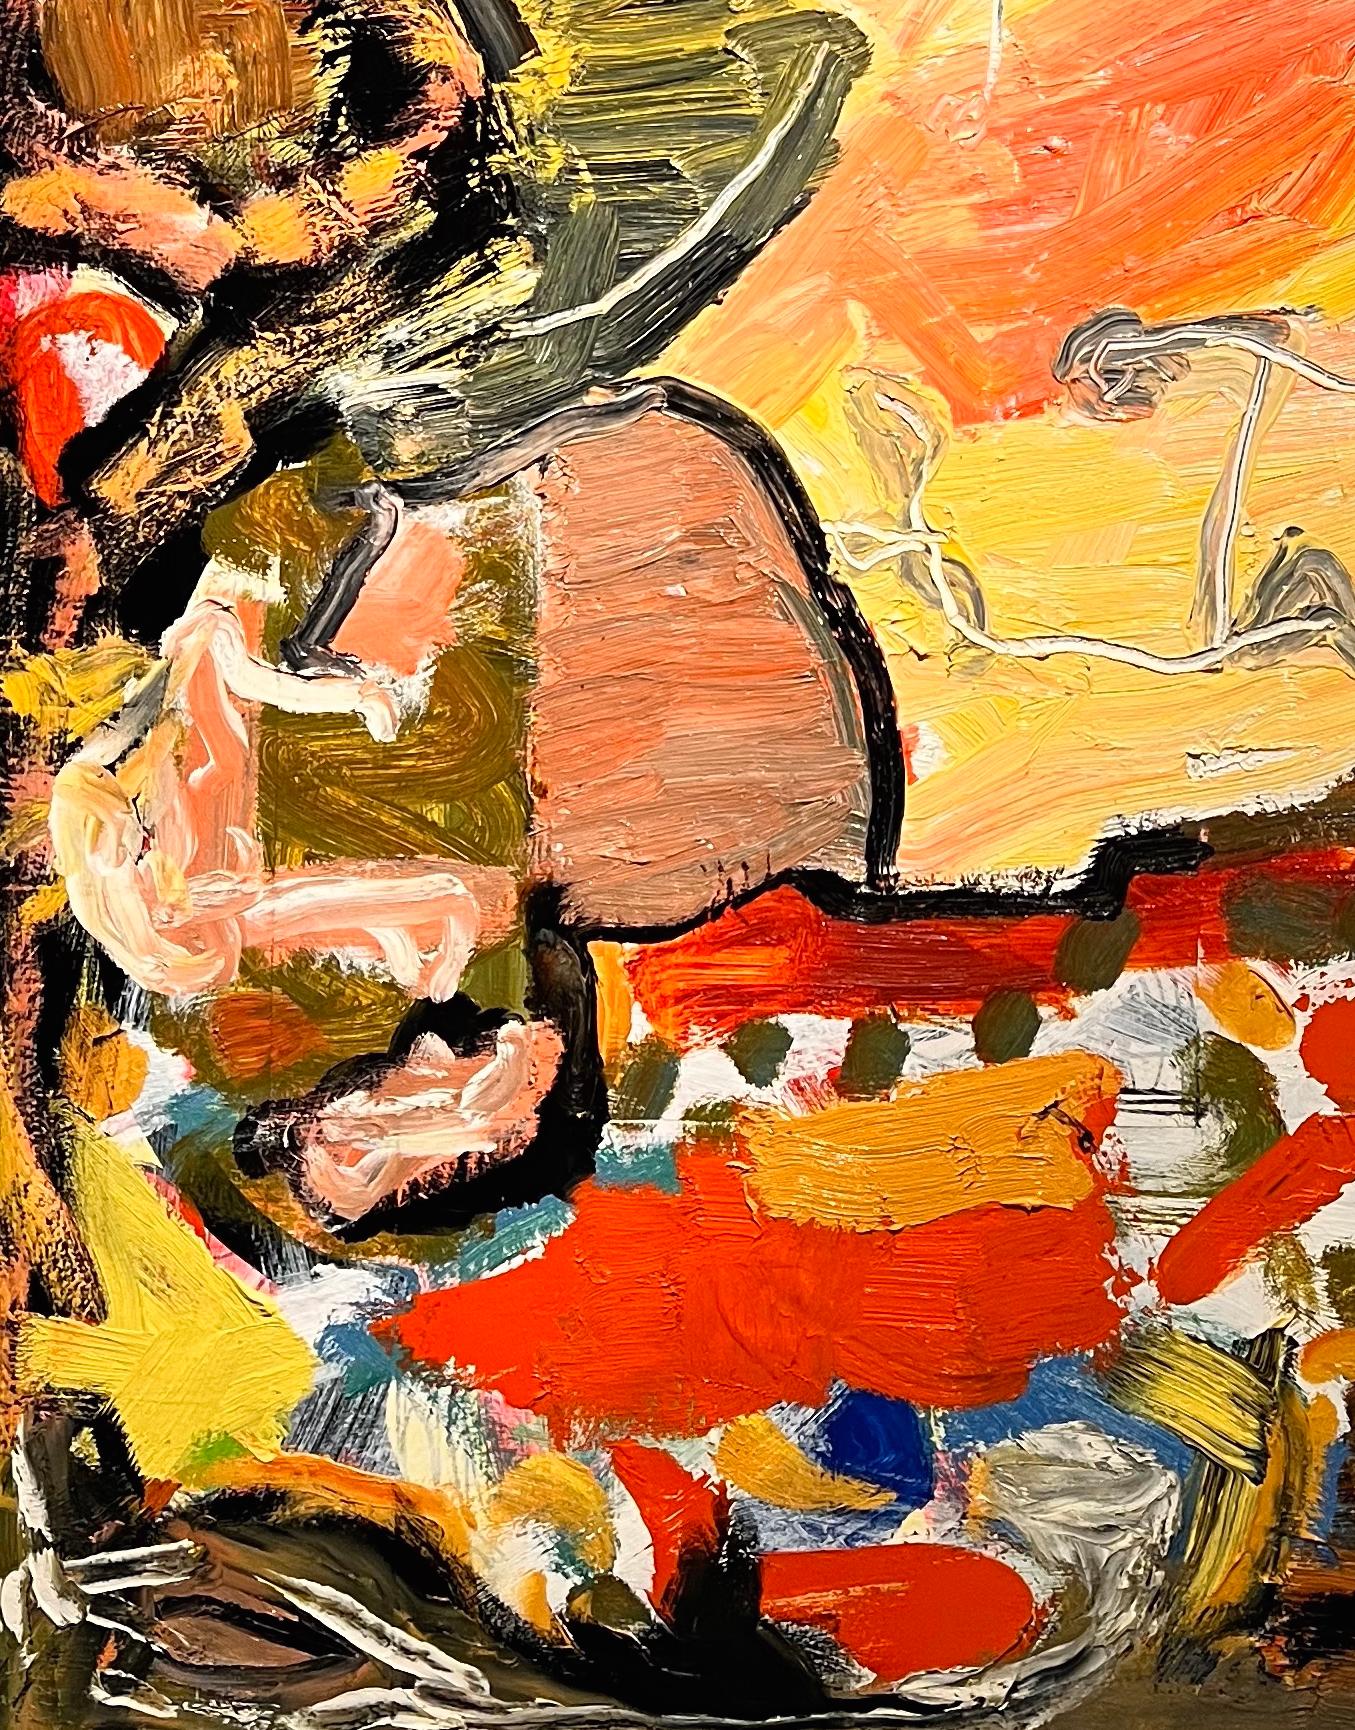 This vibrant artwork by late Houston artist Dick Wray is an abstract oil painting in the style of abstract expressionism. Thick layers of paint foster a remarkable tactility commonly found in Dick Wray’s artwork. However, underneath the bustling